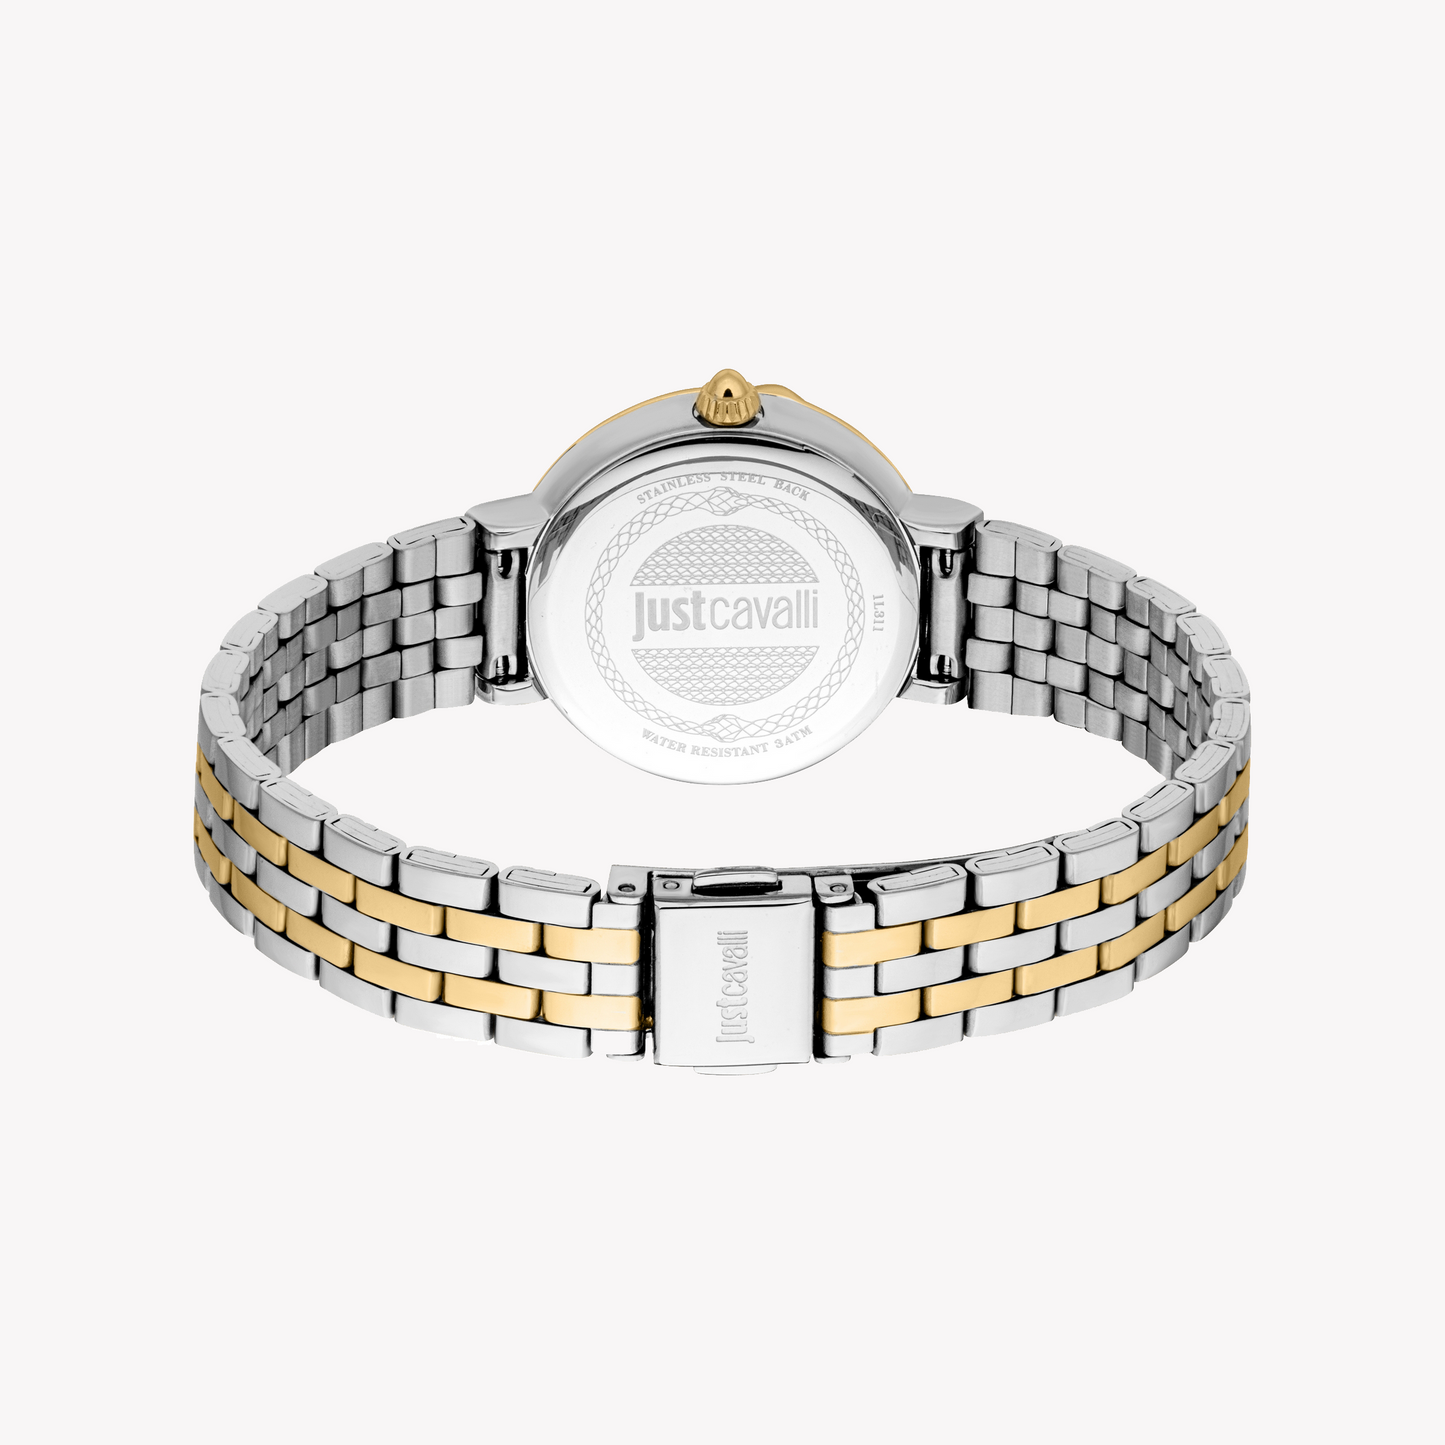 Just Cavalli Two Tone Silver & Gold Alloy Steel Women's Watch